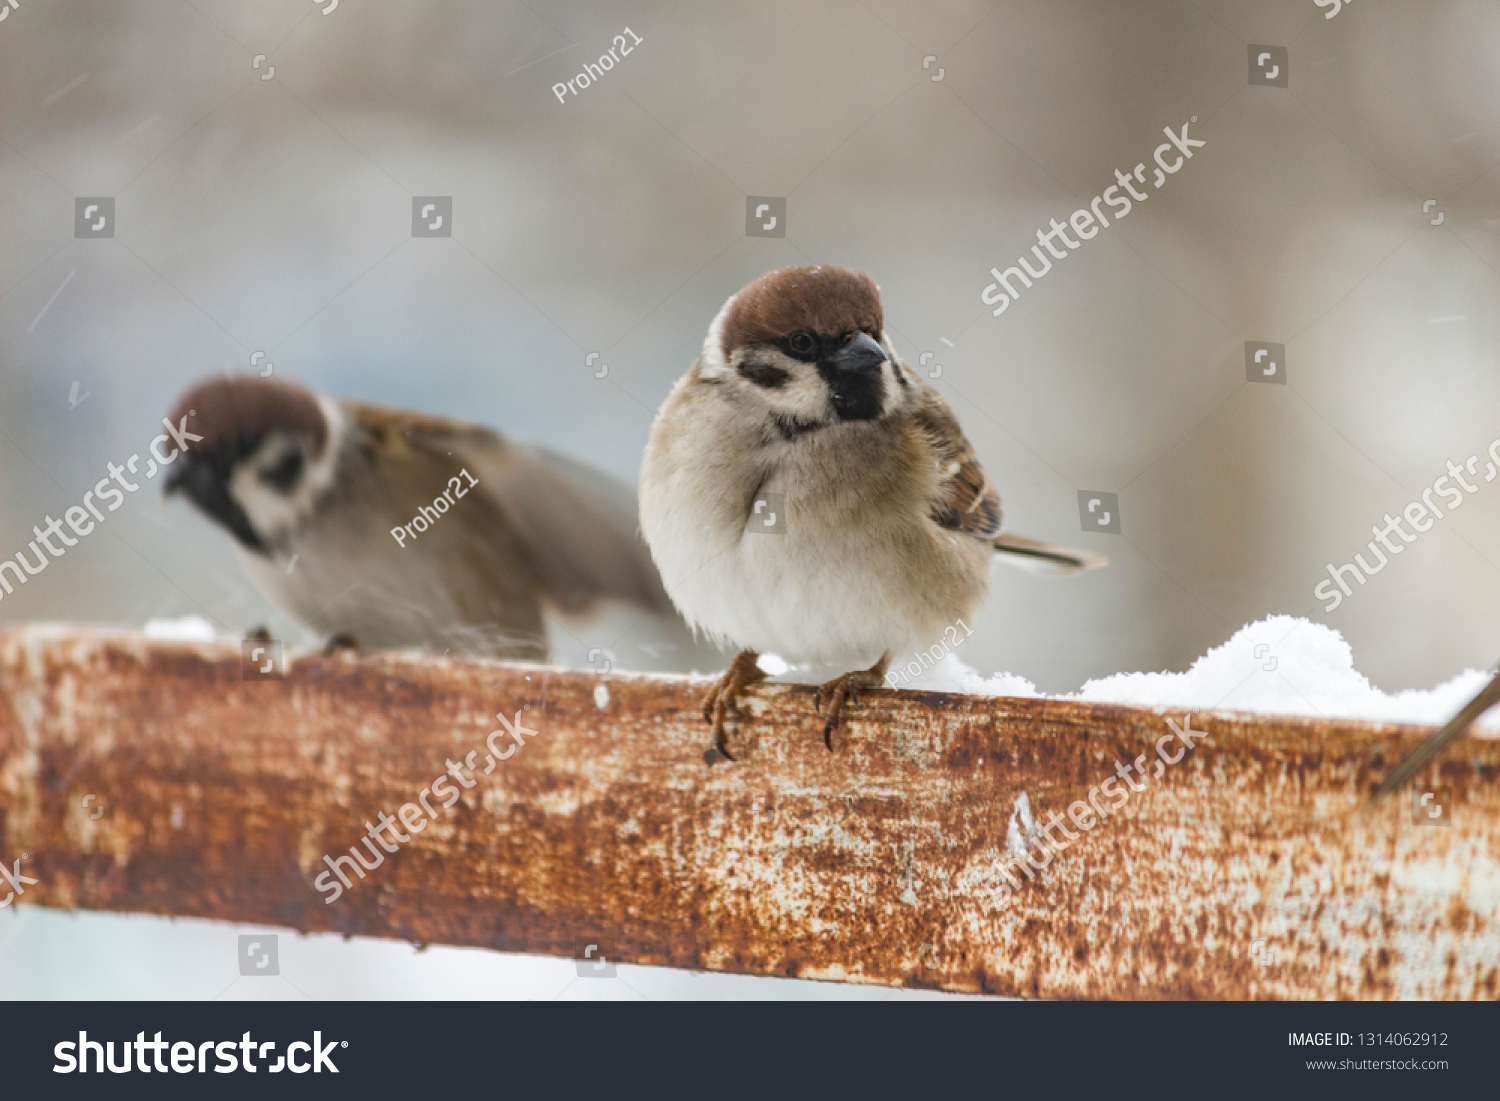 sparrows sit on a metal corner on a snowy day #1314062912